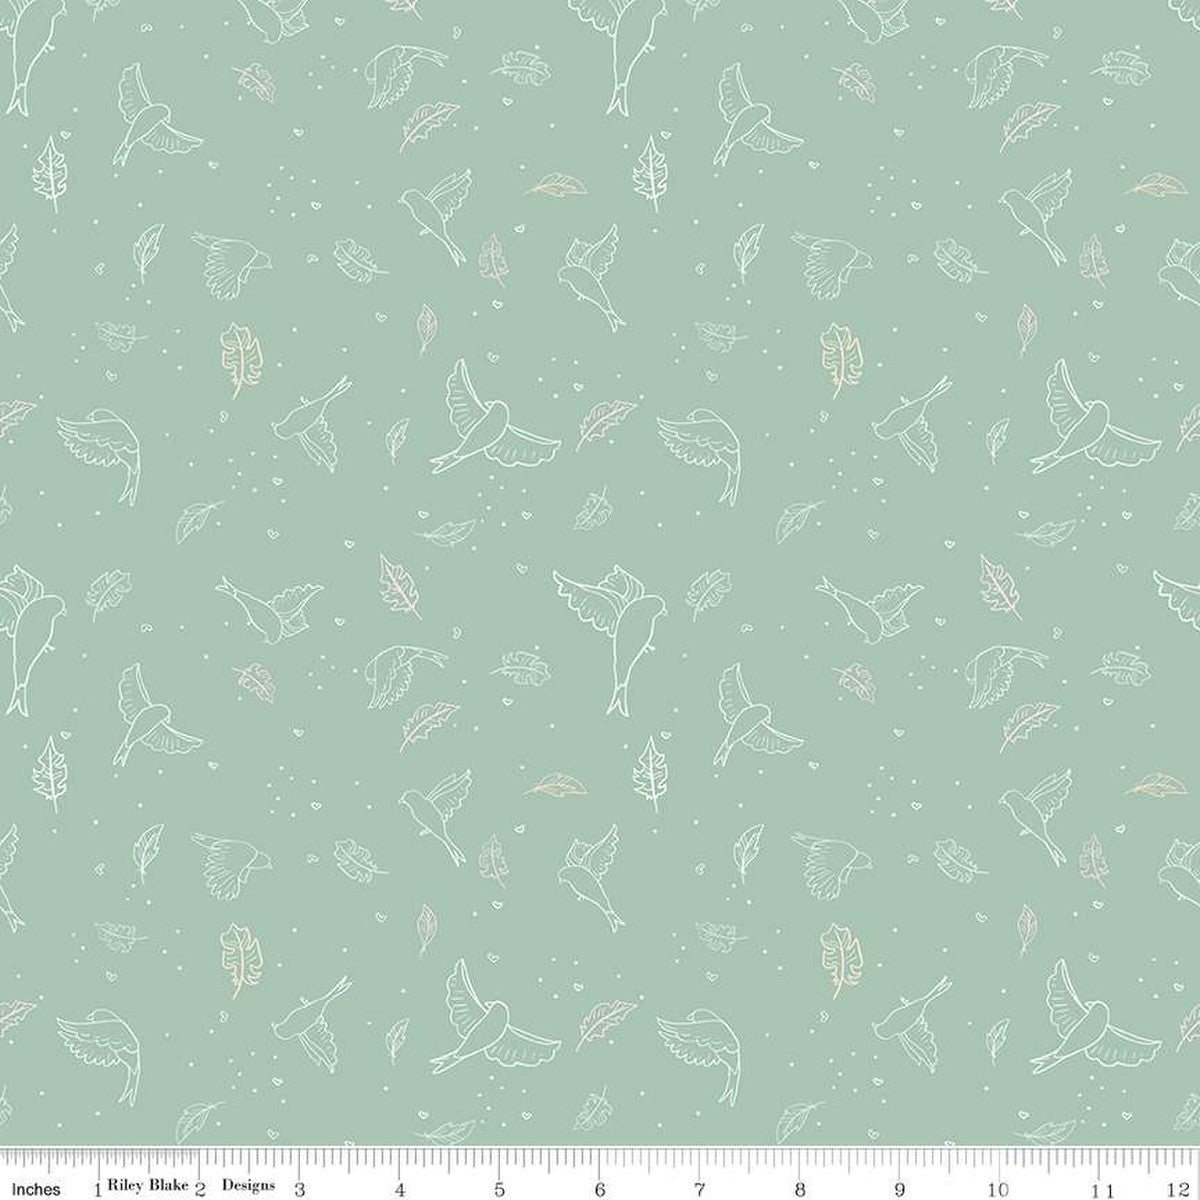 Wild and Free by Gracey Larson for Riley Blake Designs  quilt weight cotton fabric for quilting sewing garments bags soft sage green background with white cream outlines of birds in flight and drifting leaves low volume basic